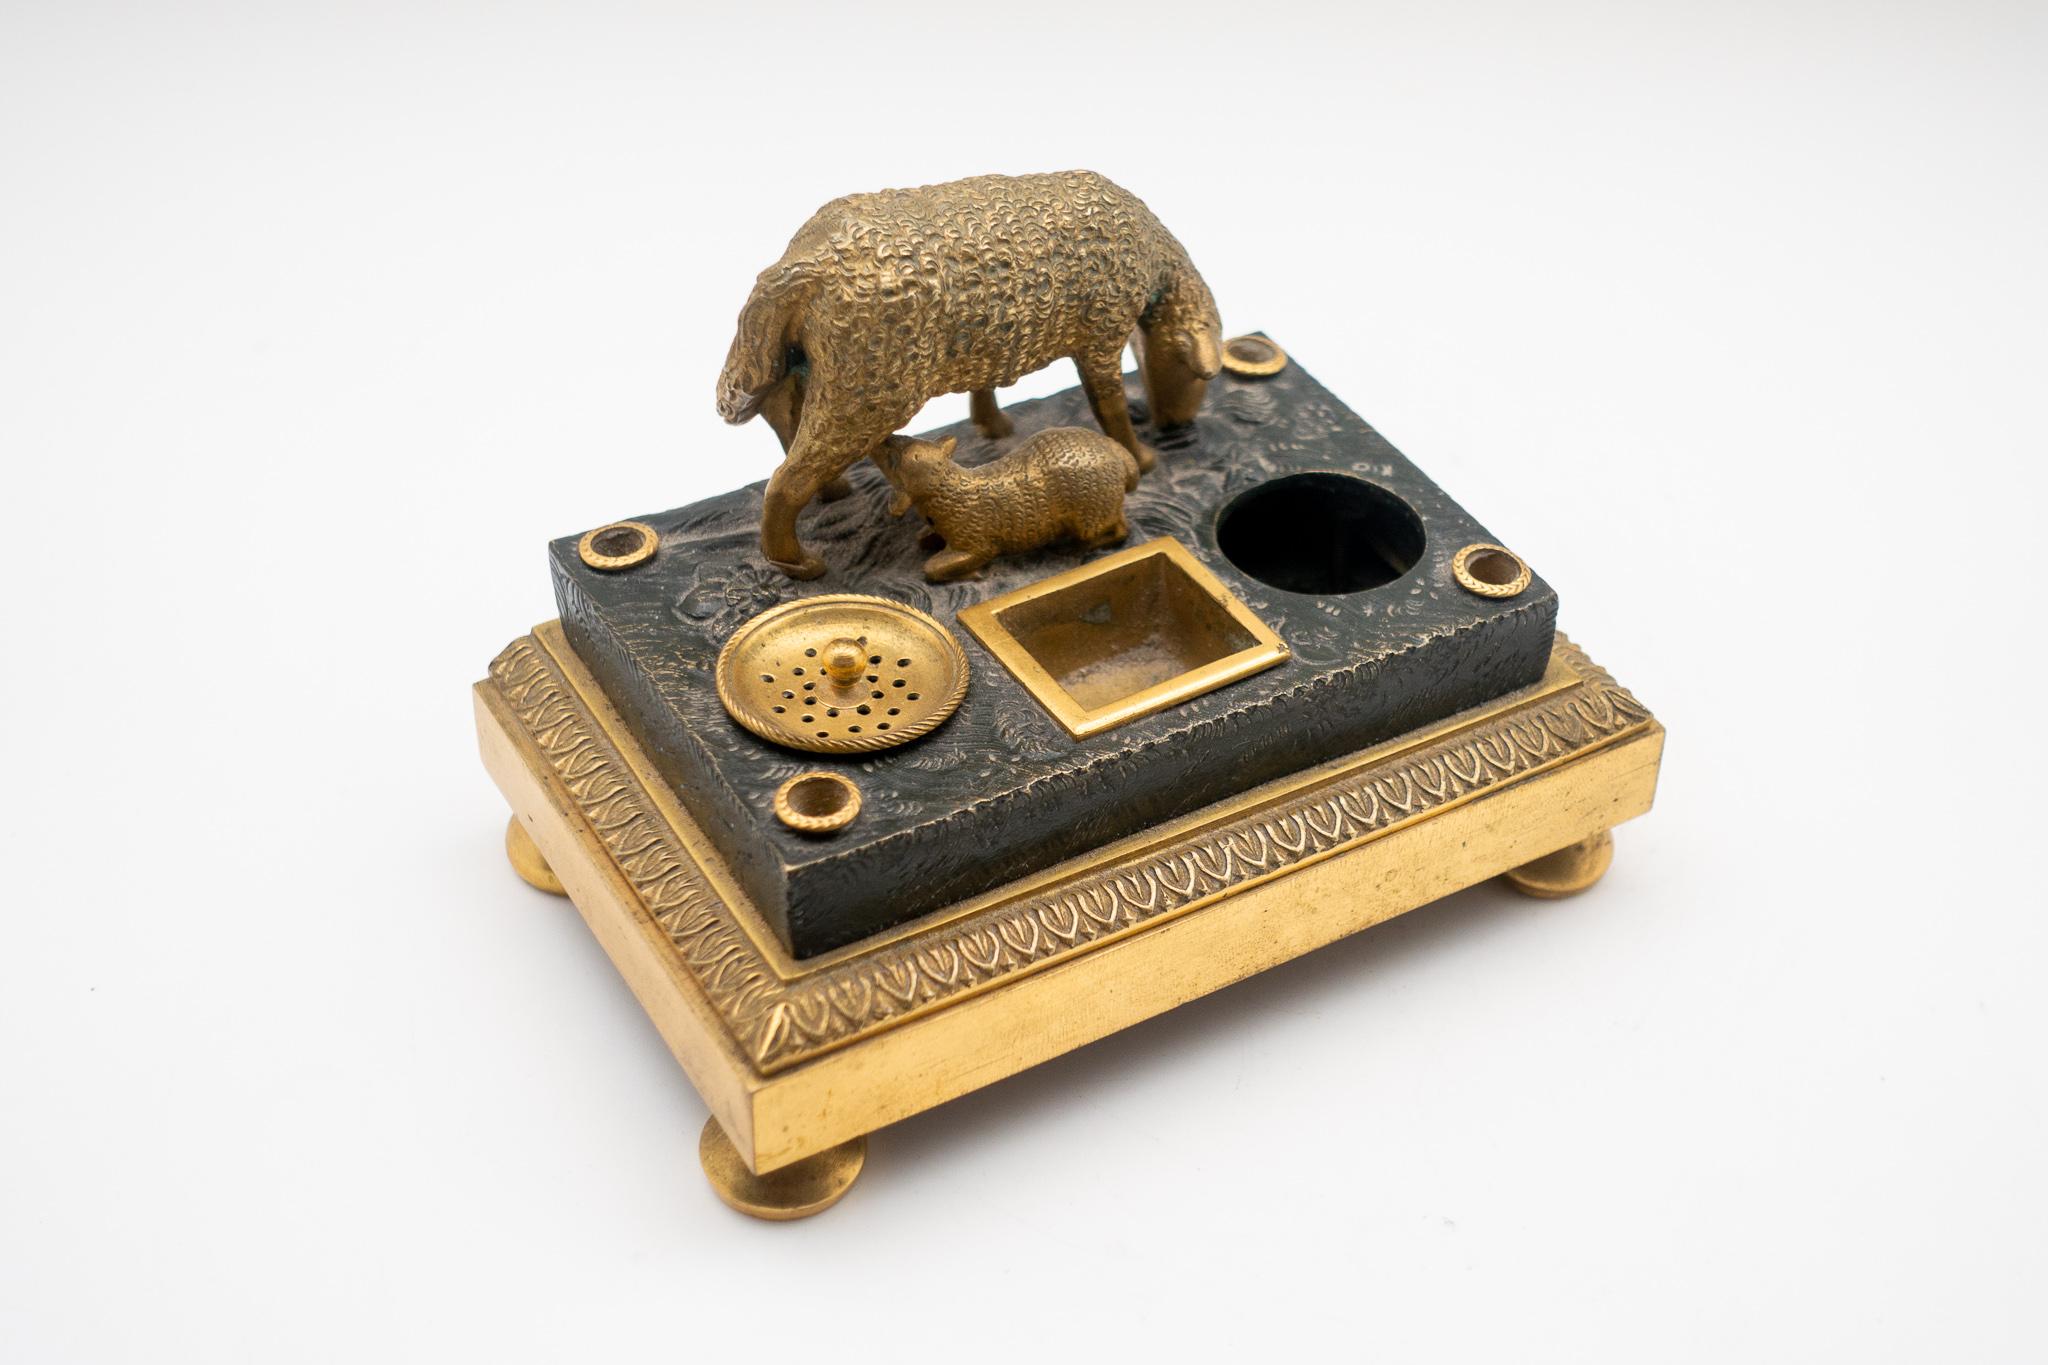 Beautiful 19th century gilded bronze French inkwell of a sheep and its suckling lamb. Ceramic inkwell liner missing on one side.